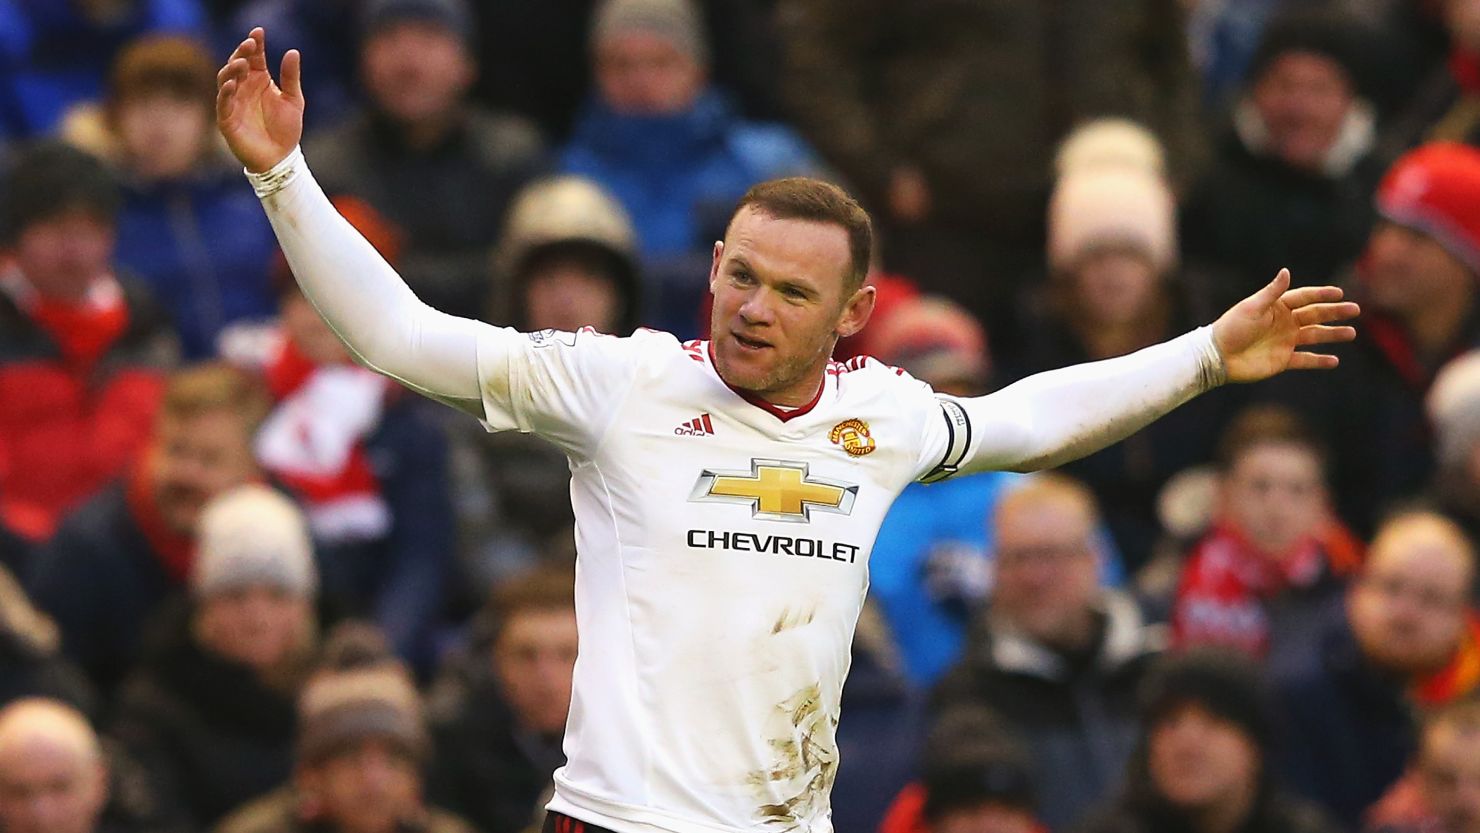 Wayne Rooney celebrates his winning goal for Manchester United at Liverpool, his 176th Premier League goal.